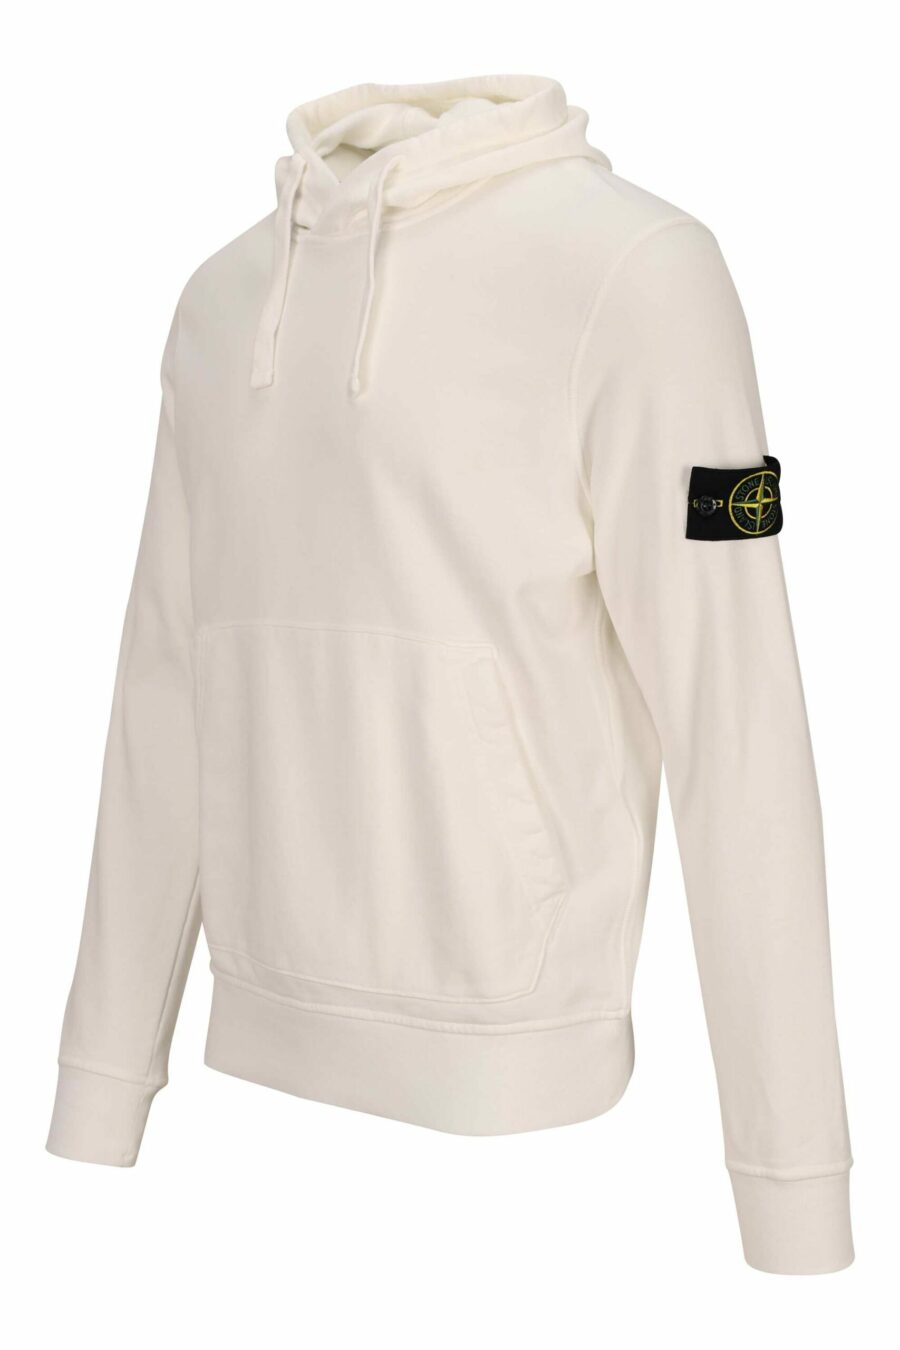 White hooded sweatshirt with compass logo patch - 8052572854187 1 scaled